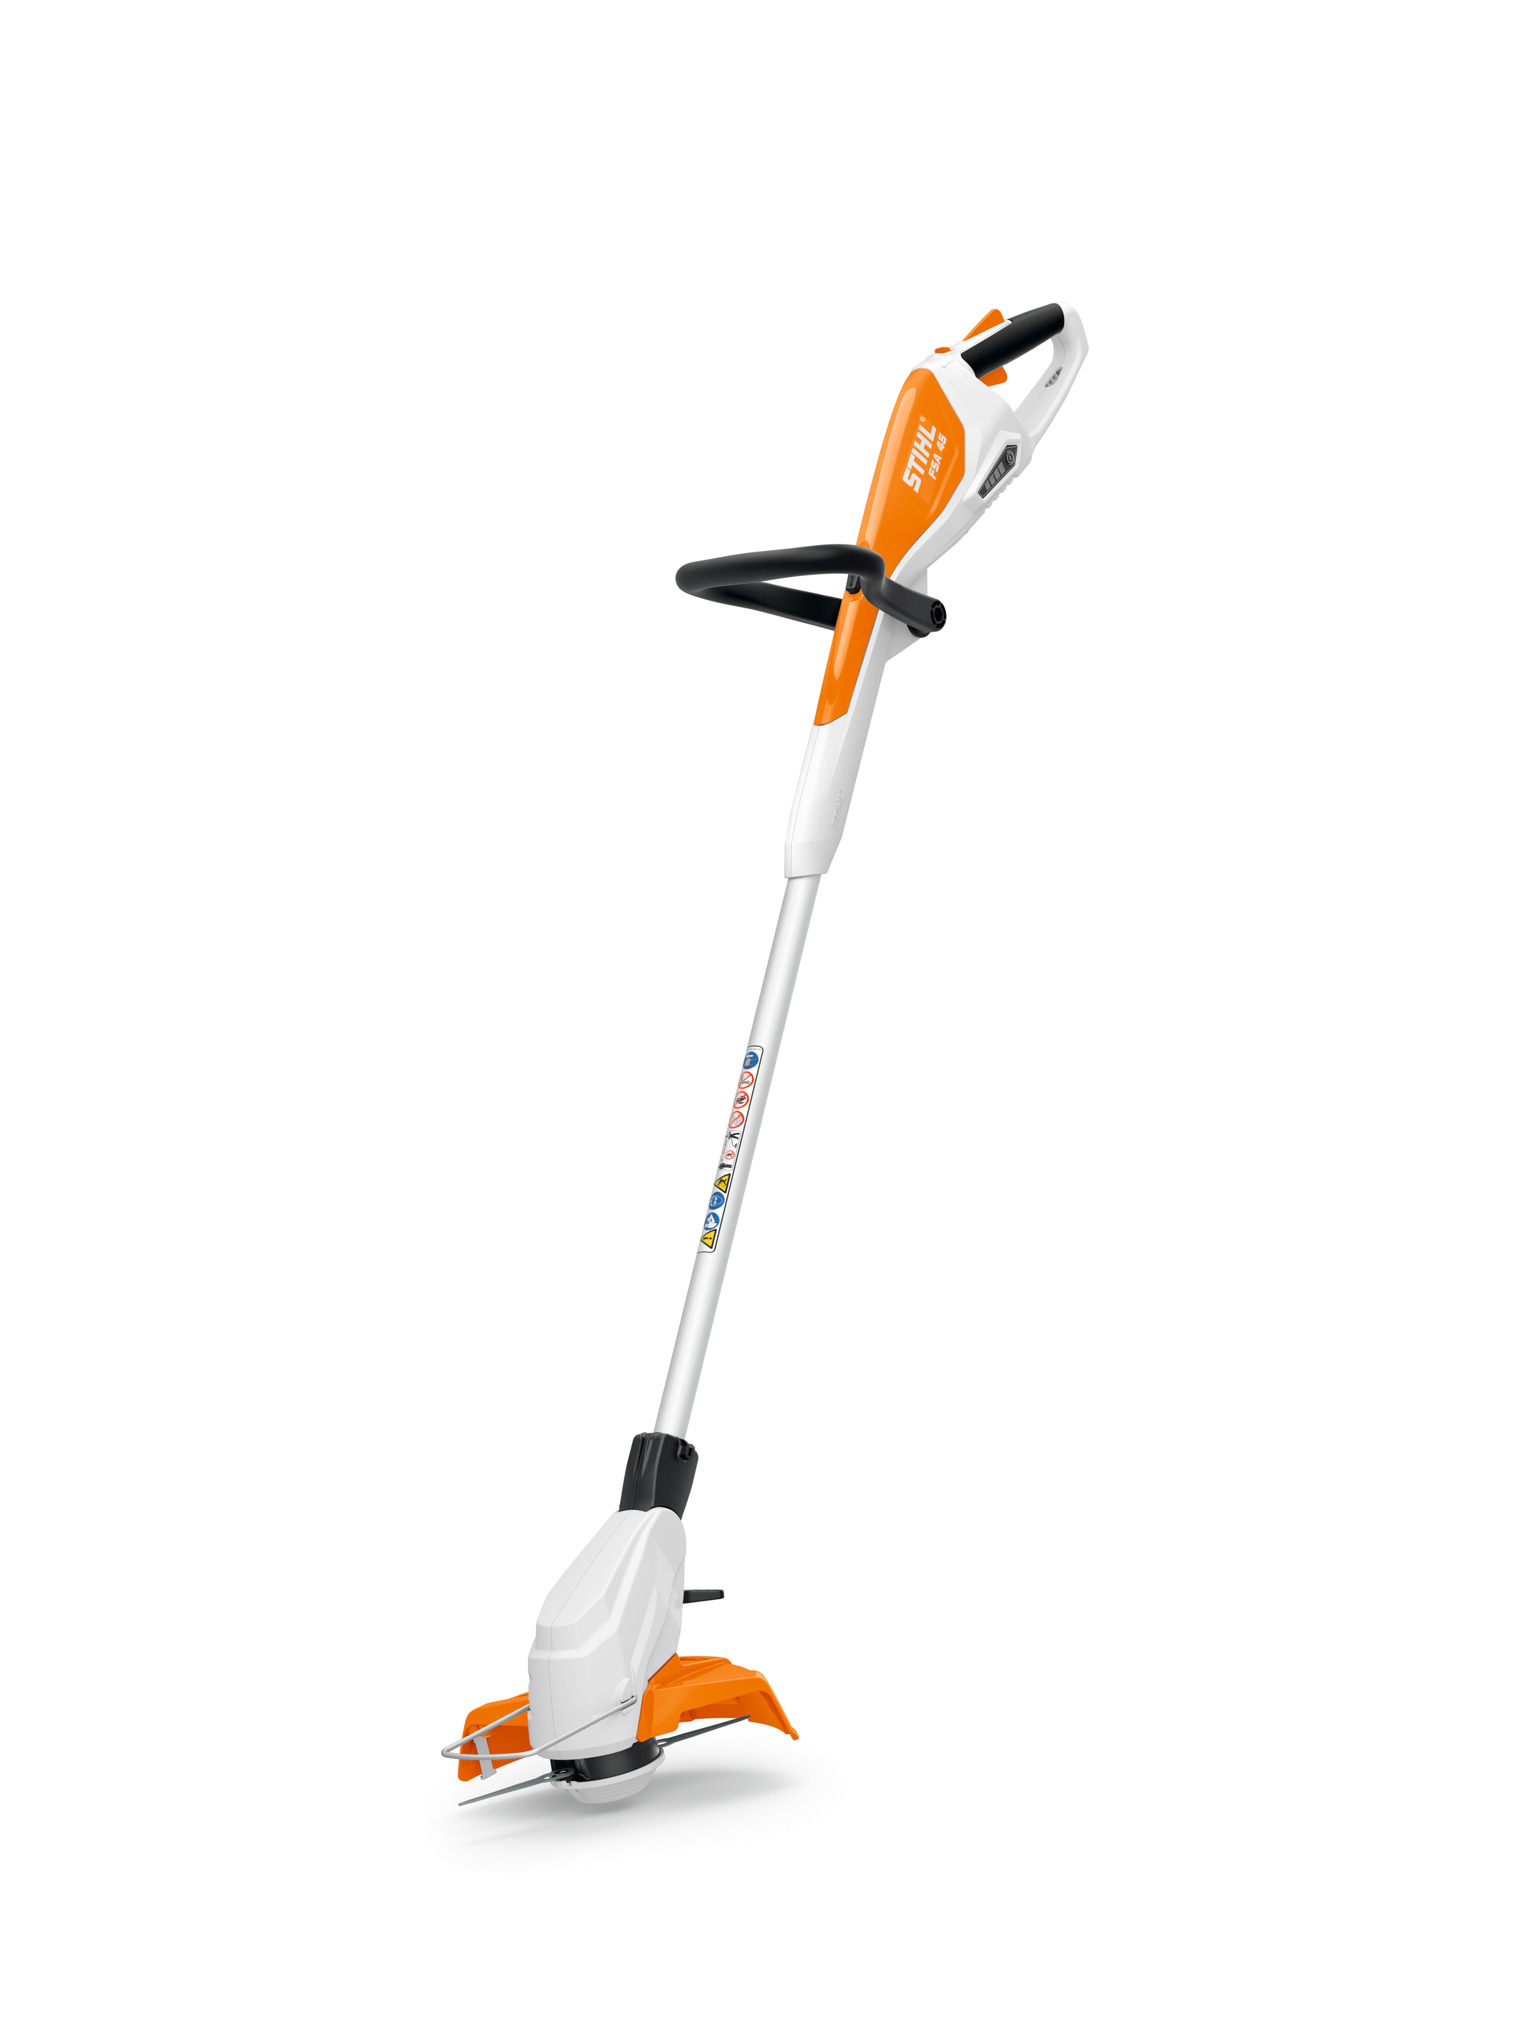 accugrastrimmers | STIHL